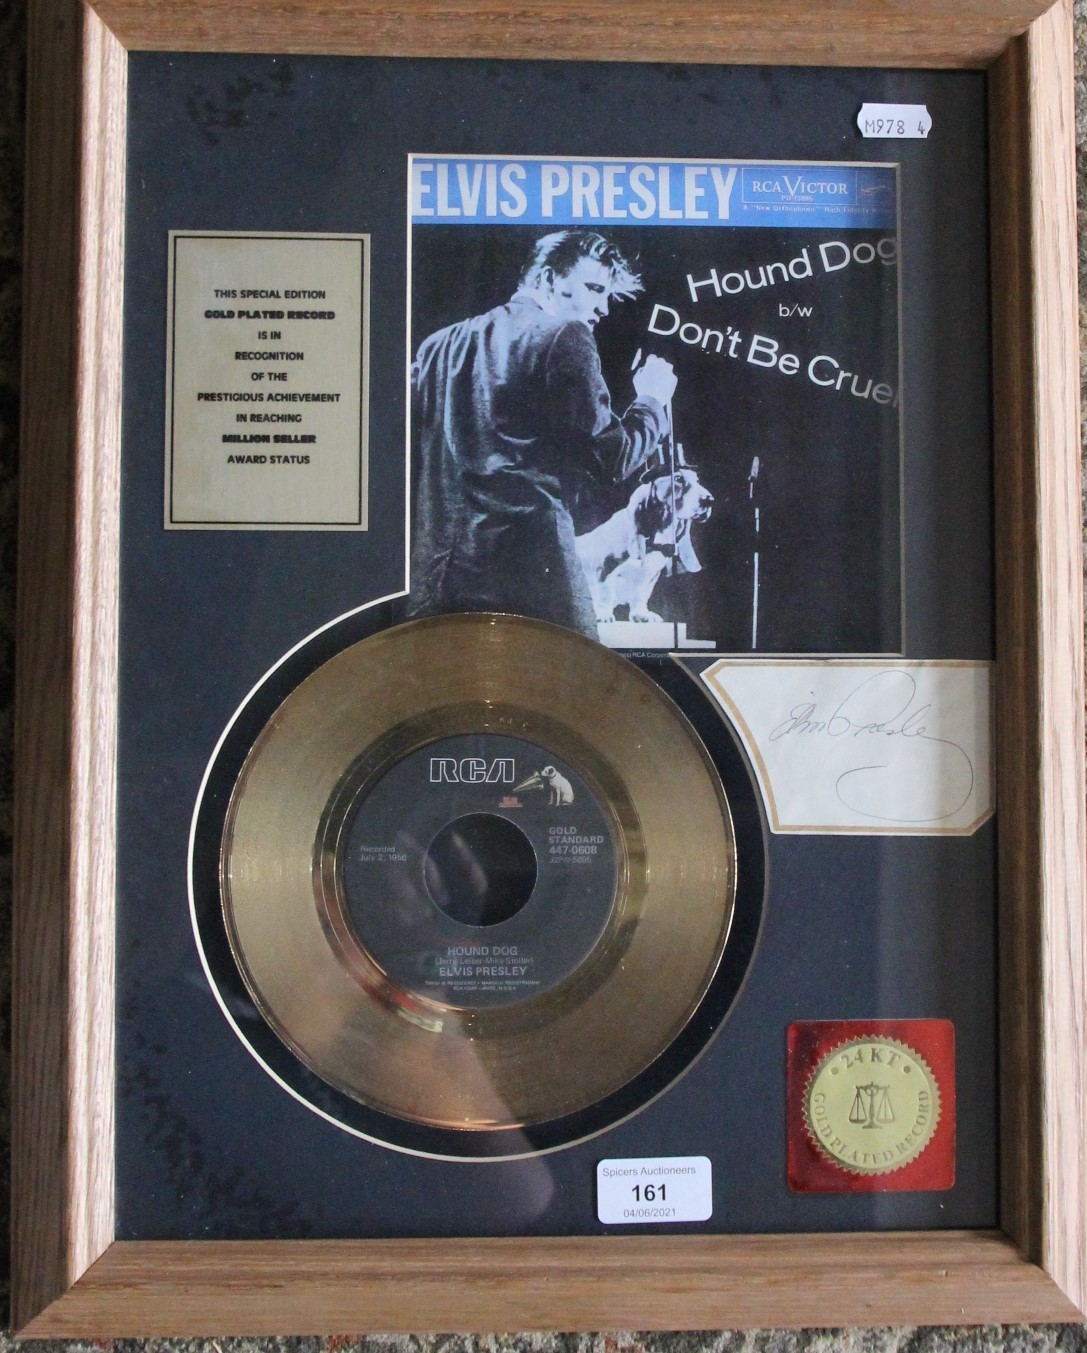 A special edition 24kt gold disc "Elvis Presley - Hound Dog" complete with autograph of Elvis